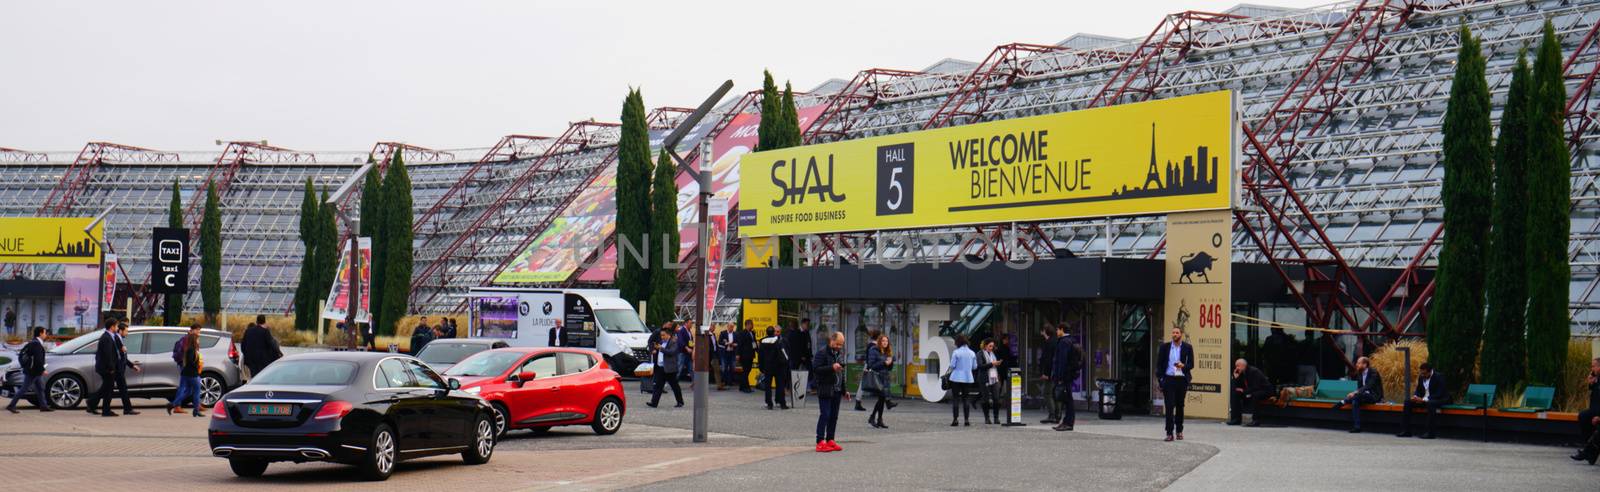 Paris/France - October 24 2018: SIAL trade fair specialized at food industry by Jindrich_Blecha